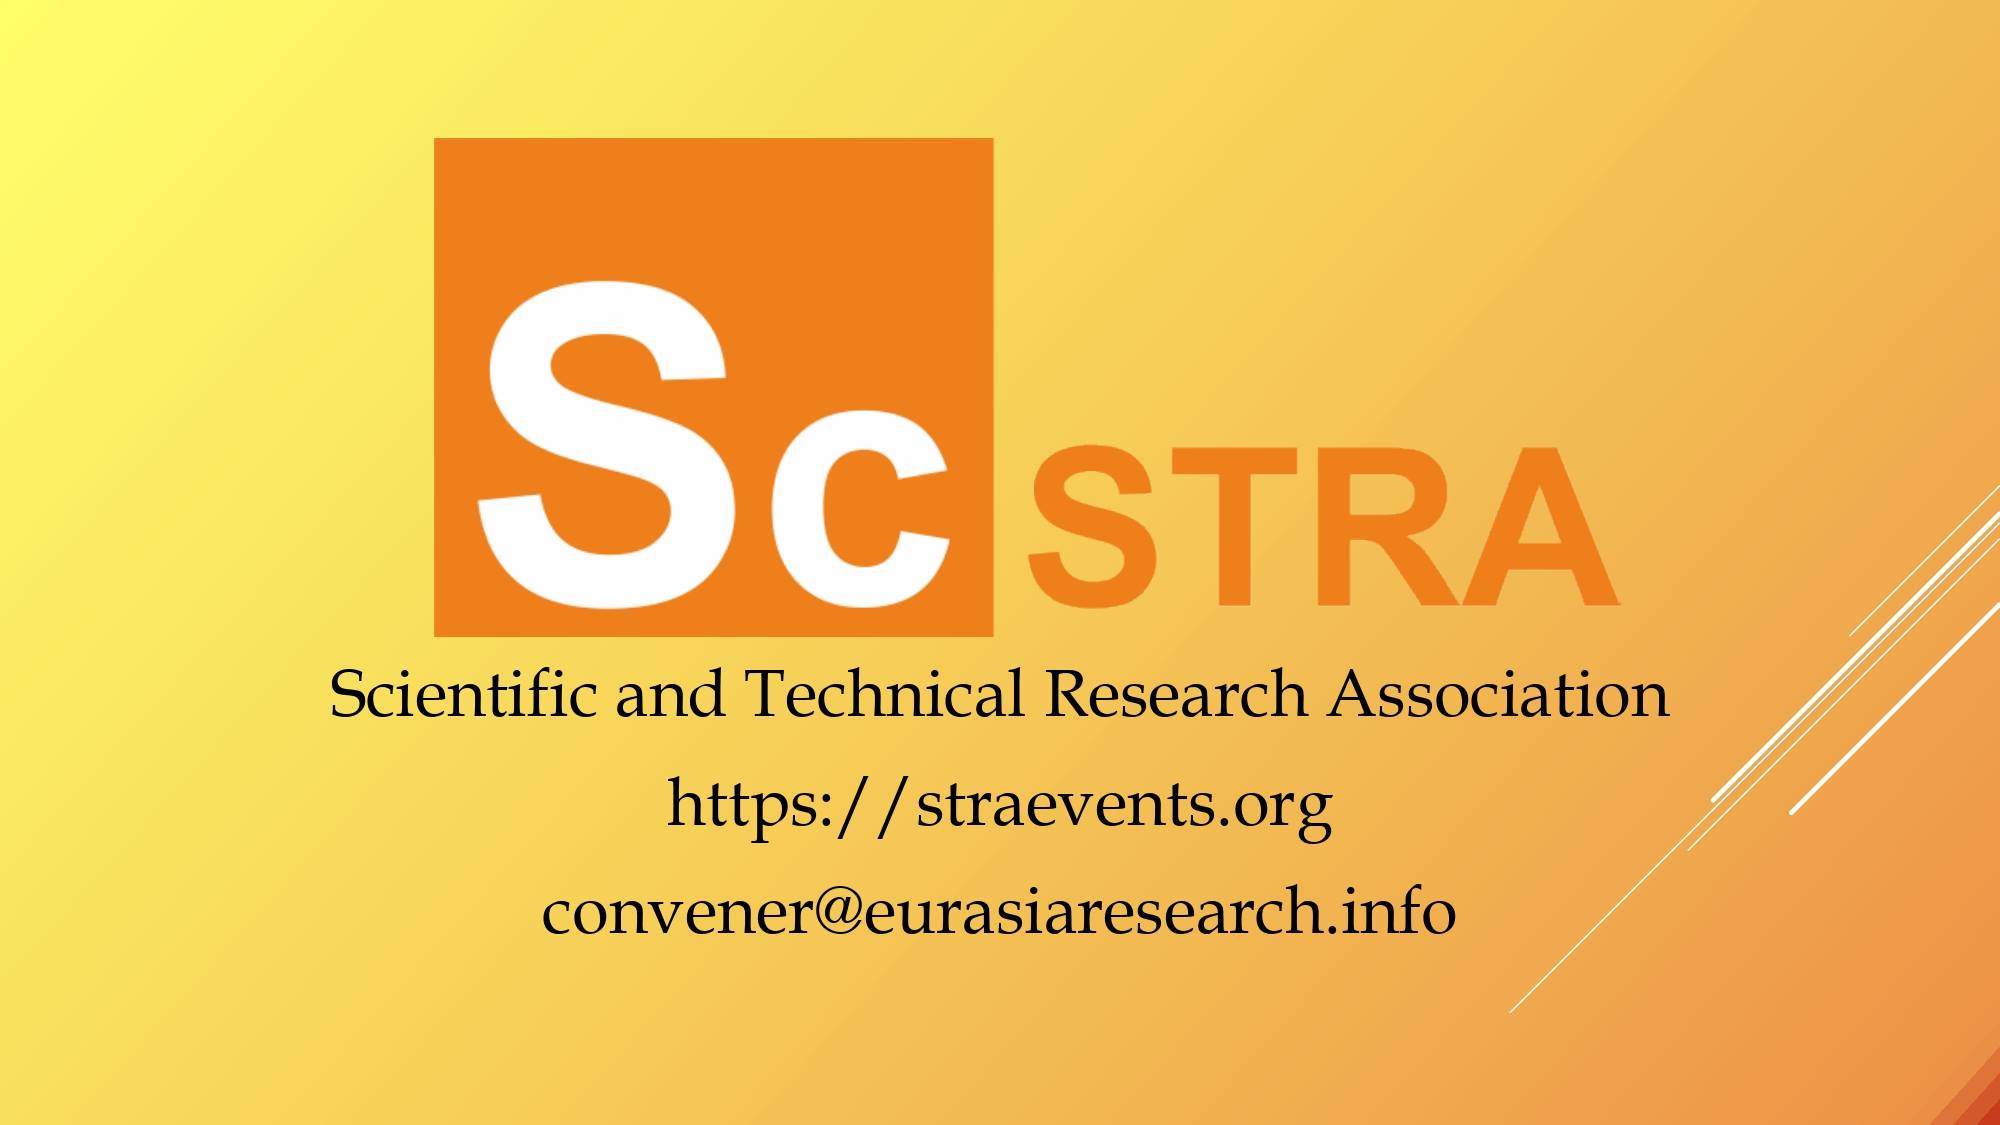 4th ICSTR Barcelona – International Conference on Science & Technology Research, 26-27 August 2021, Barcelona, Castilla y Leon, Spain